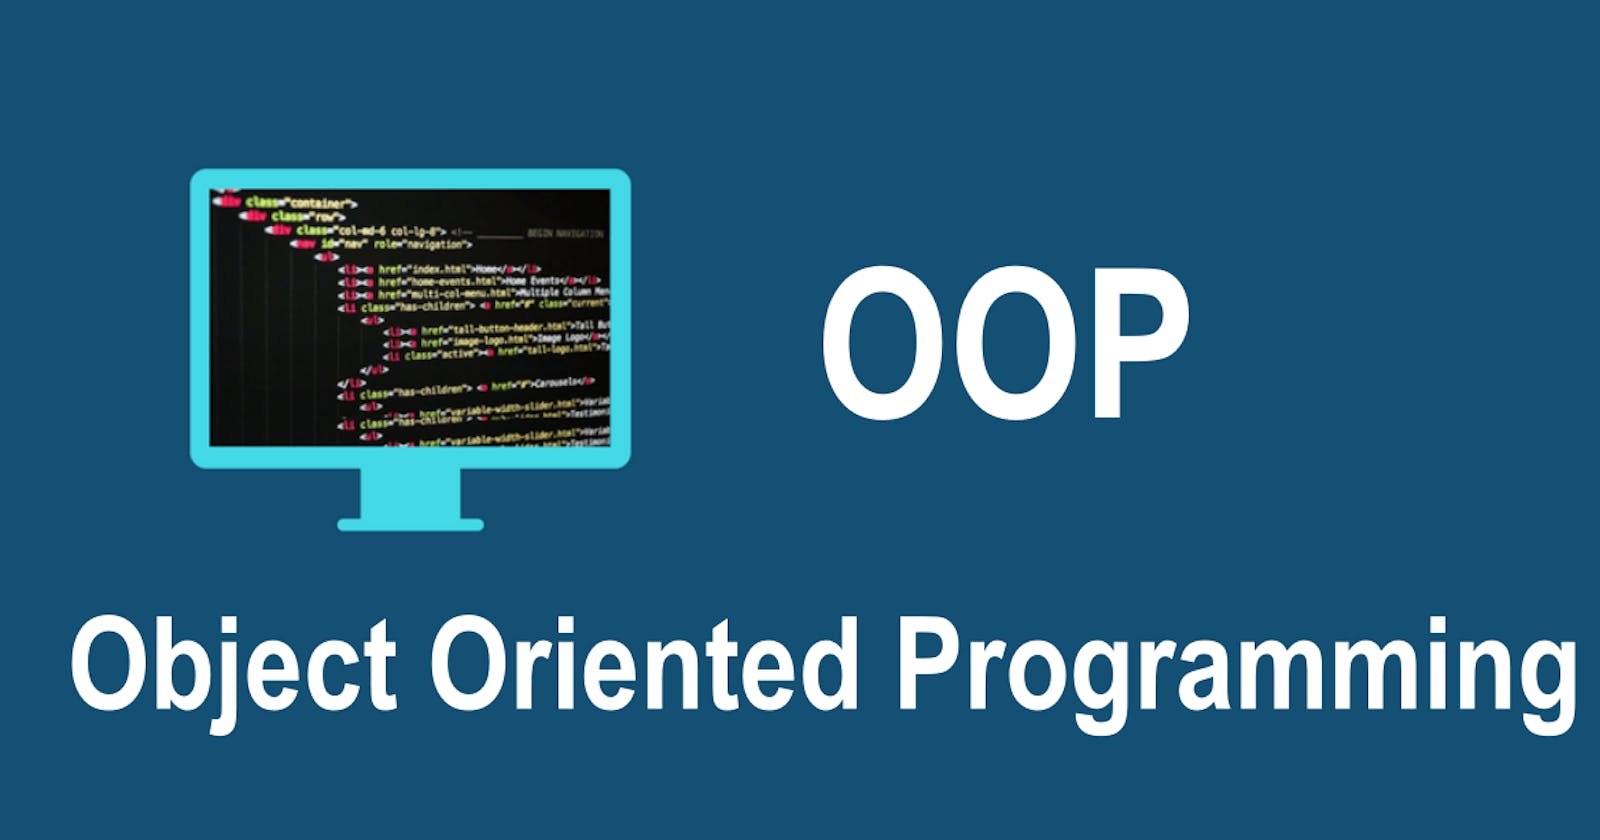 What Is Object Oriented Programming?